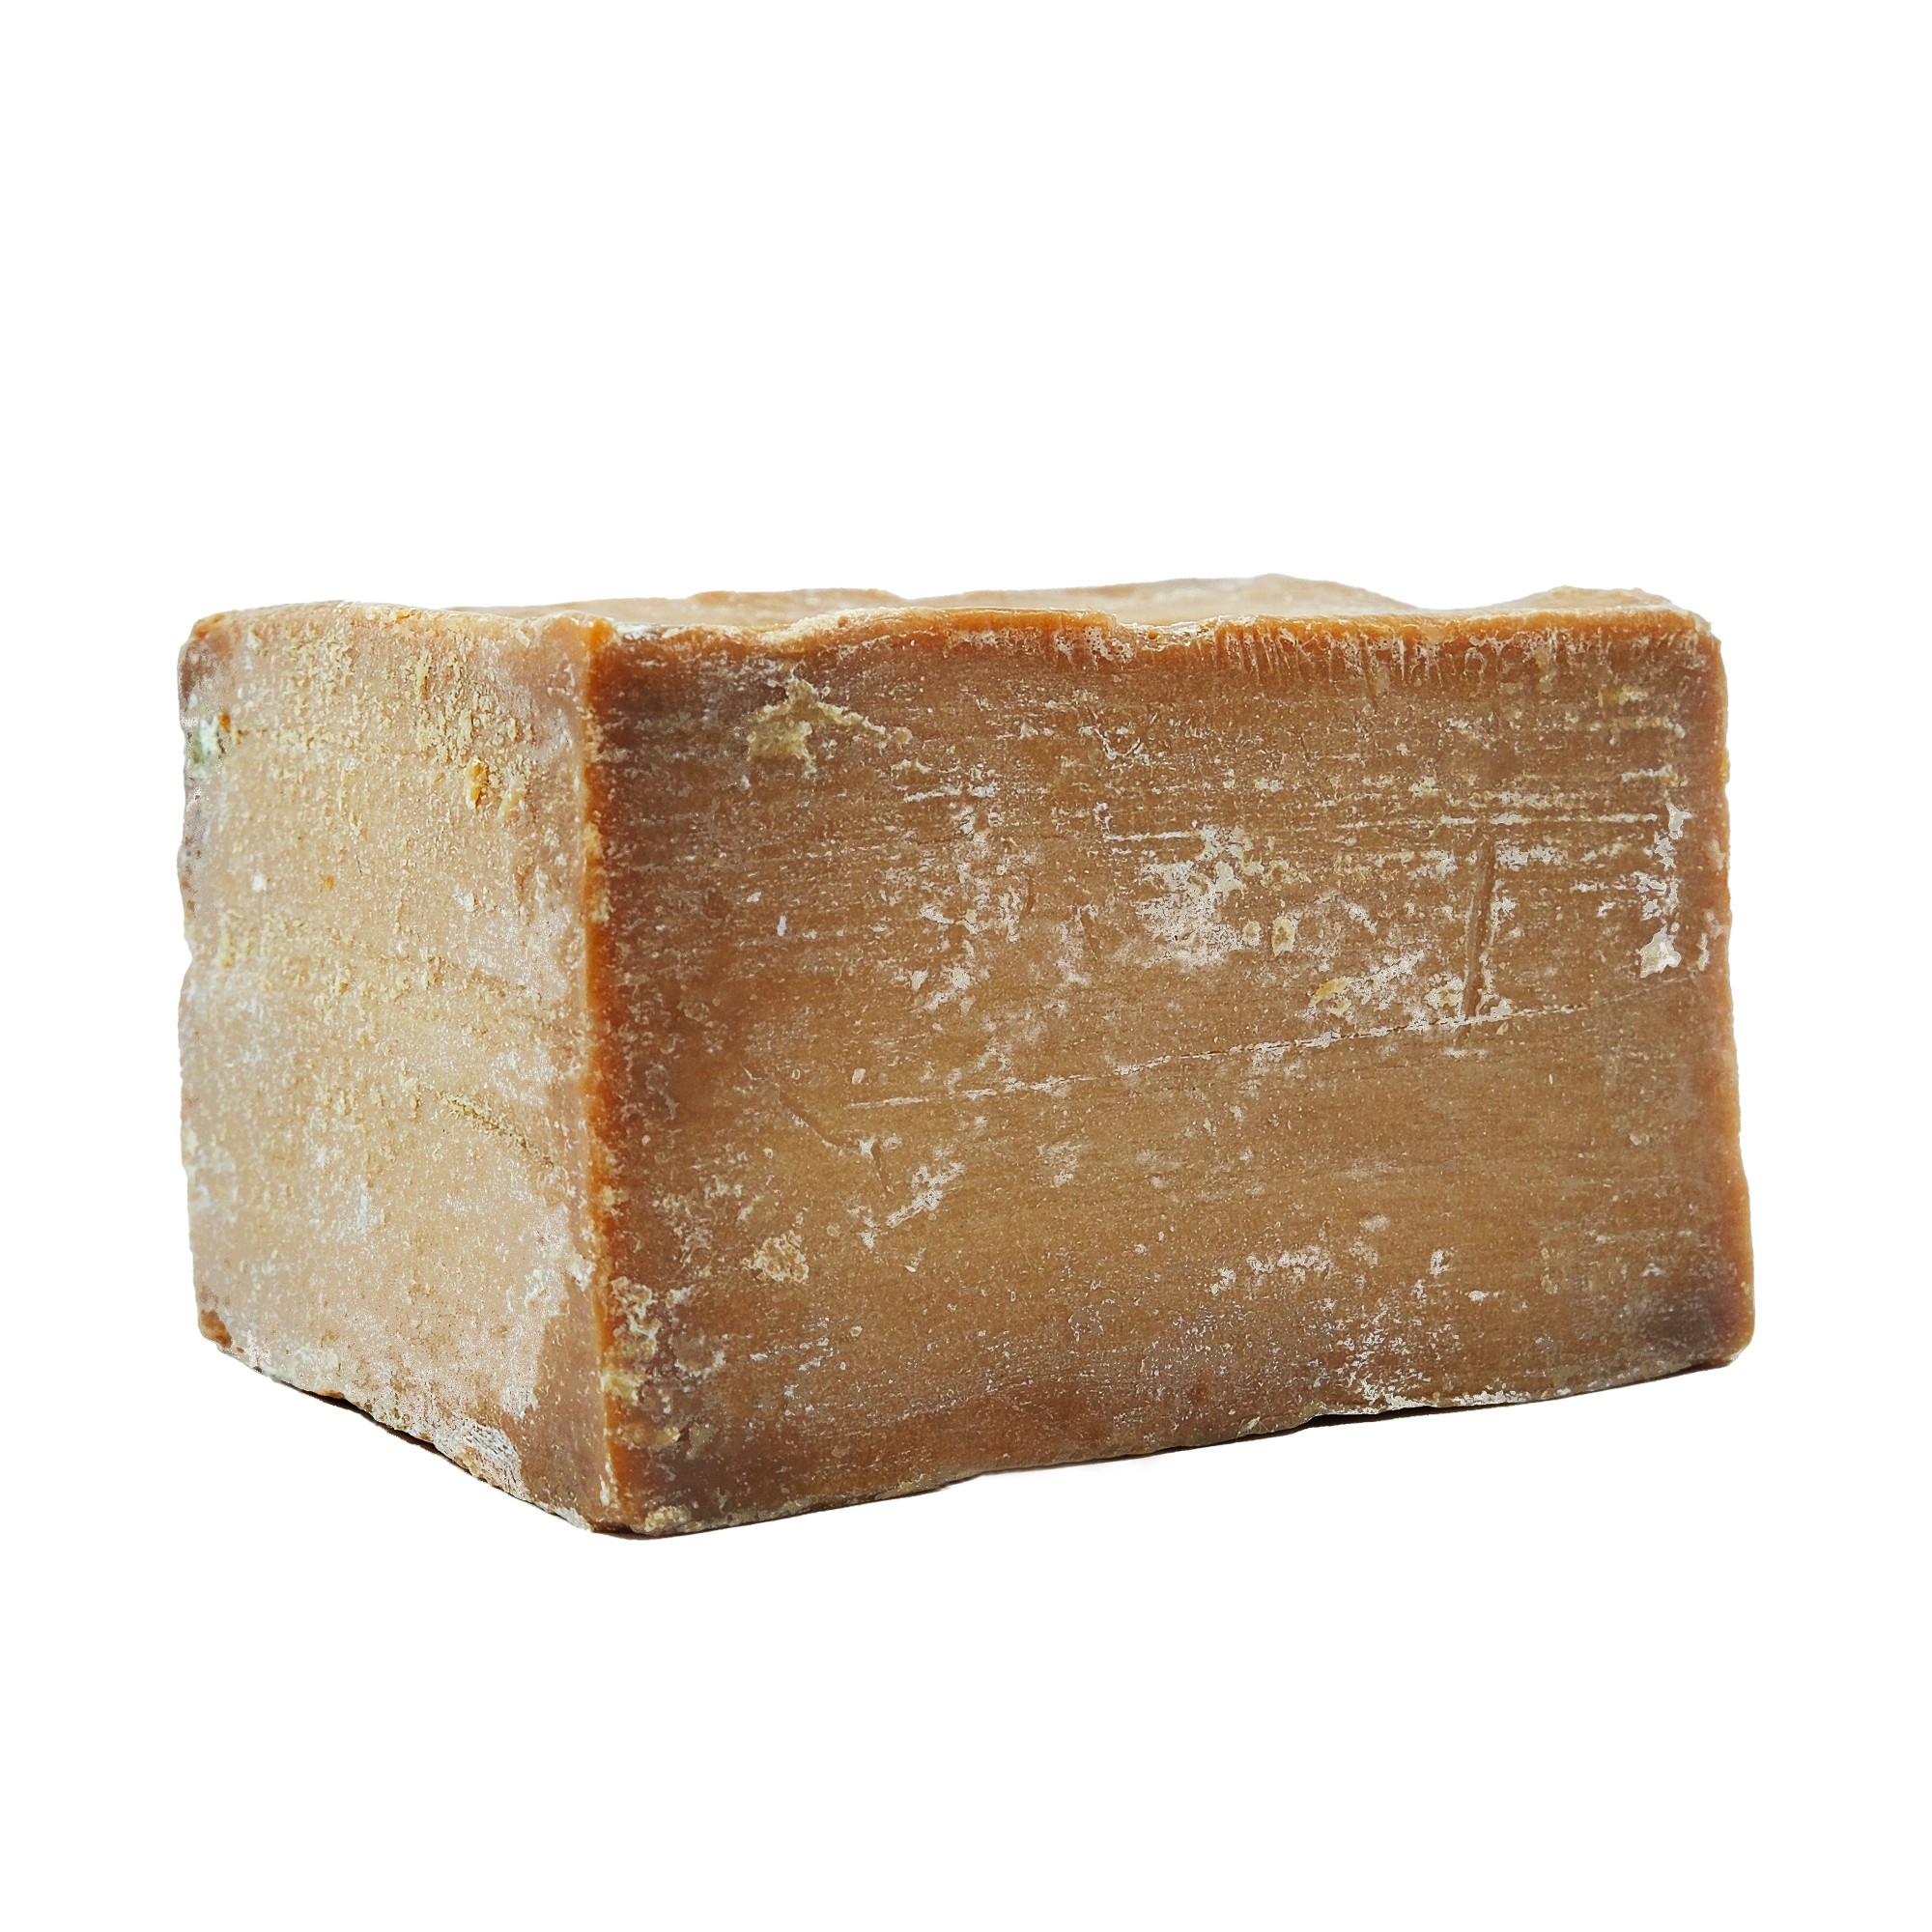 Mesopotamia 180 G Aleppo Soap with 100% Olive Oil Organic Handmade Natural Moisturizer for Dry and Normal Skin